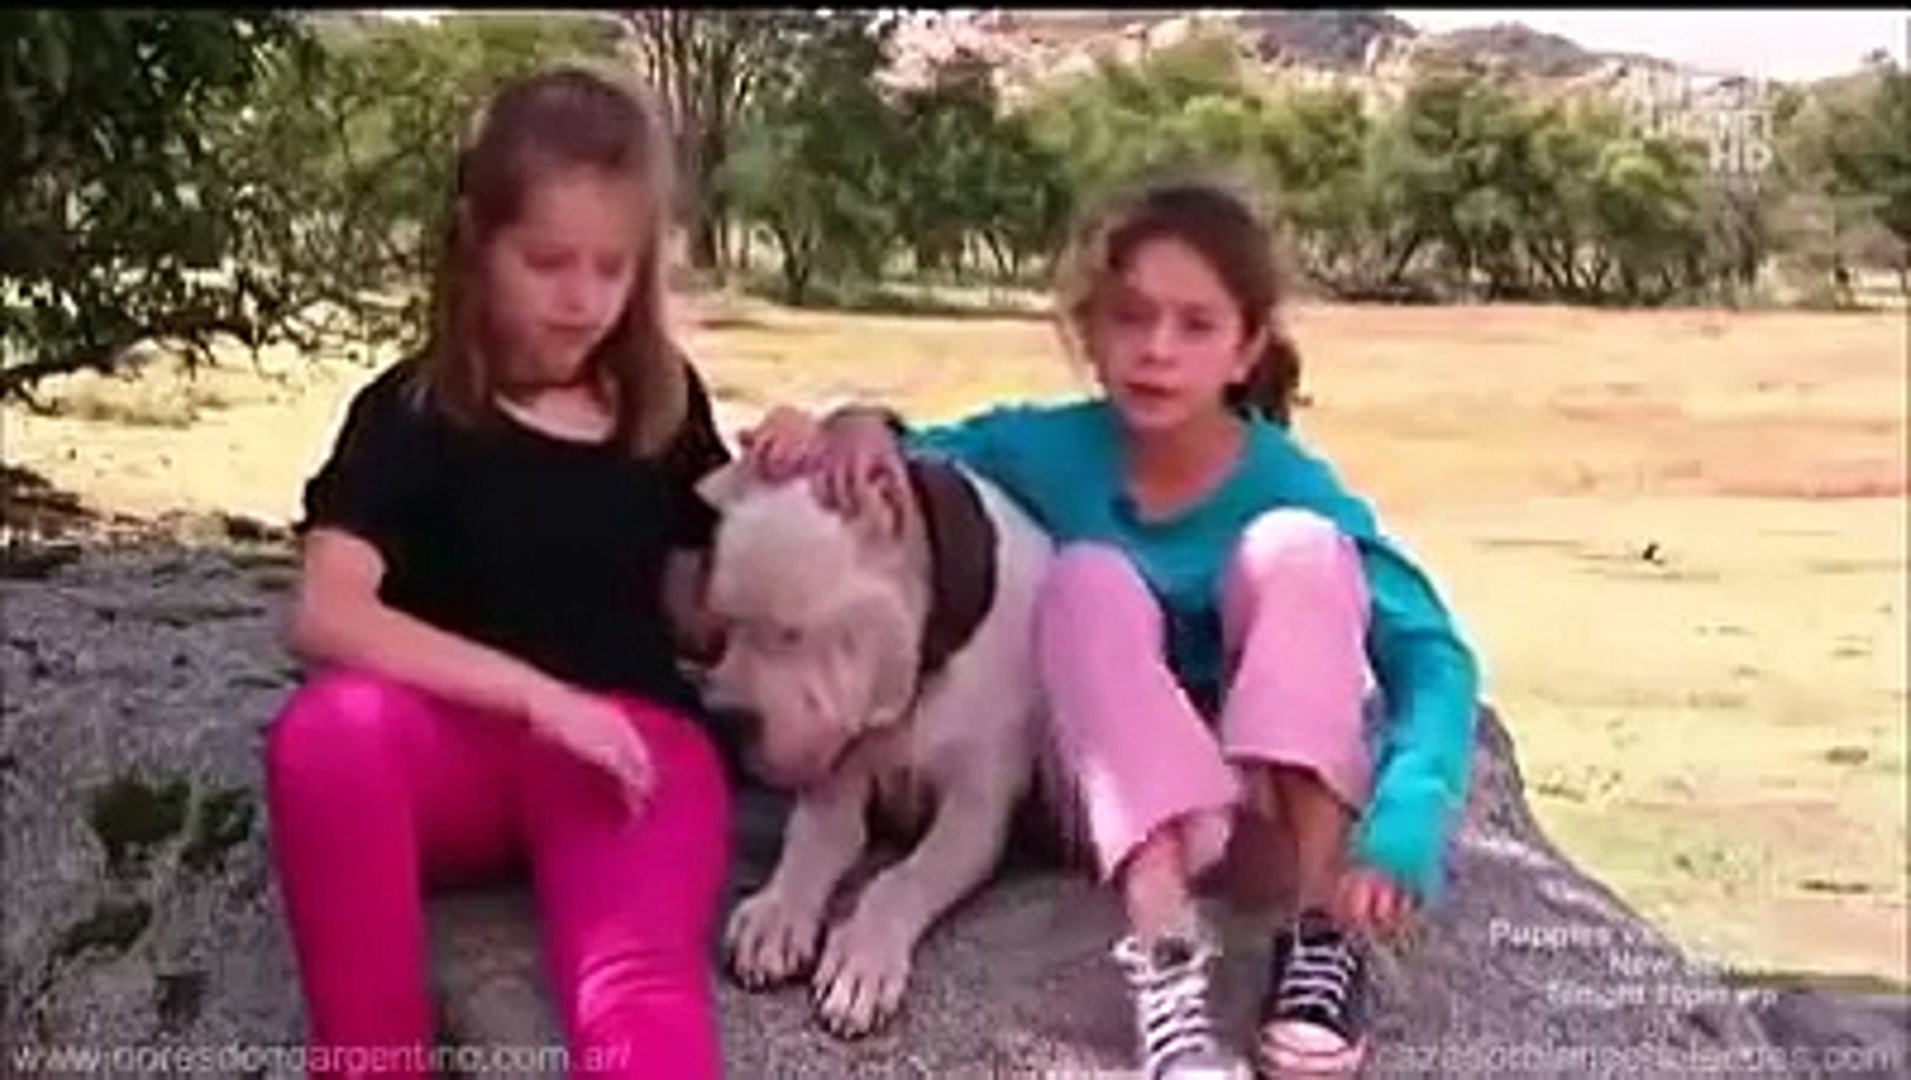 Dogo Argentino Morocho saves 2 girls from Puma attack - Dailymotion Video